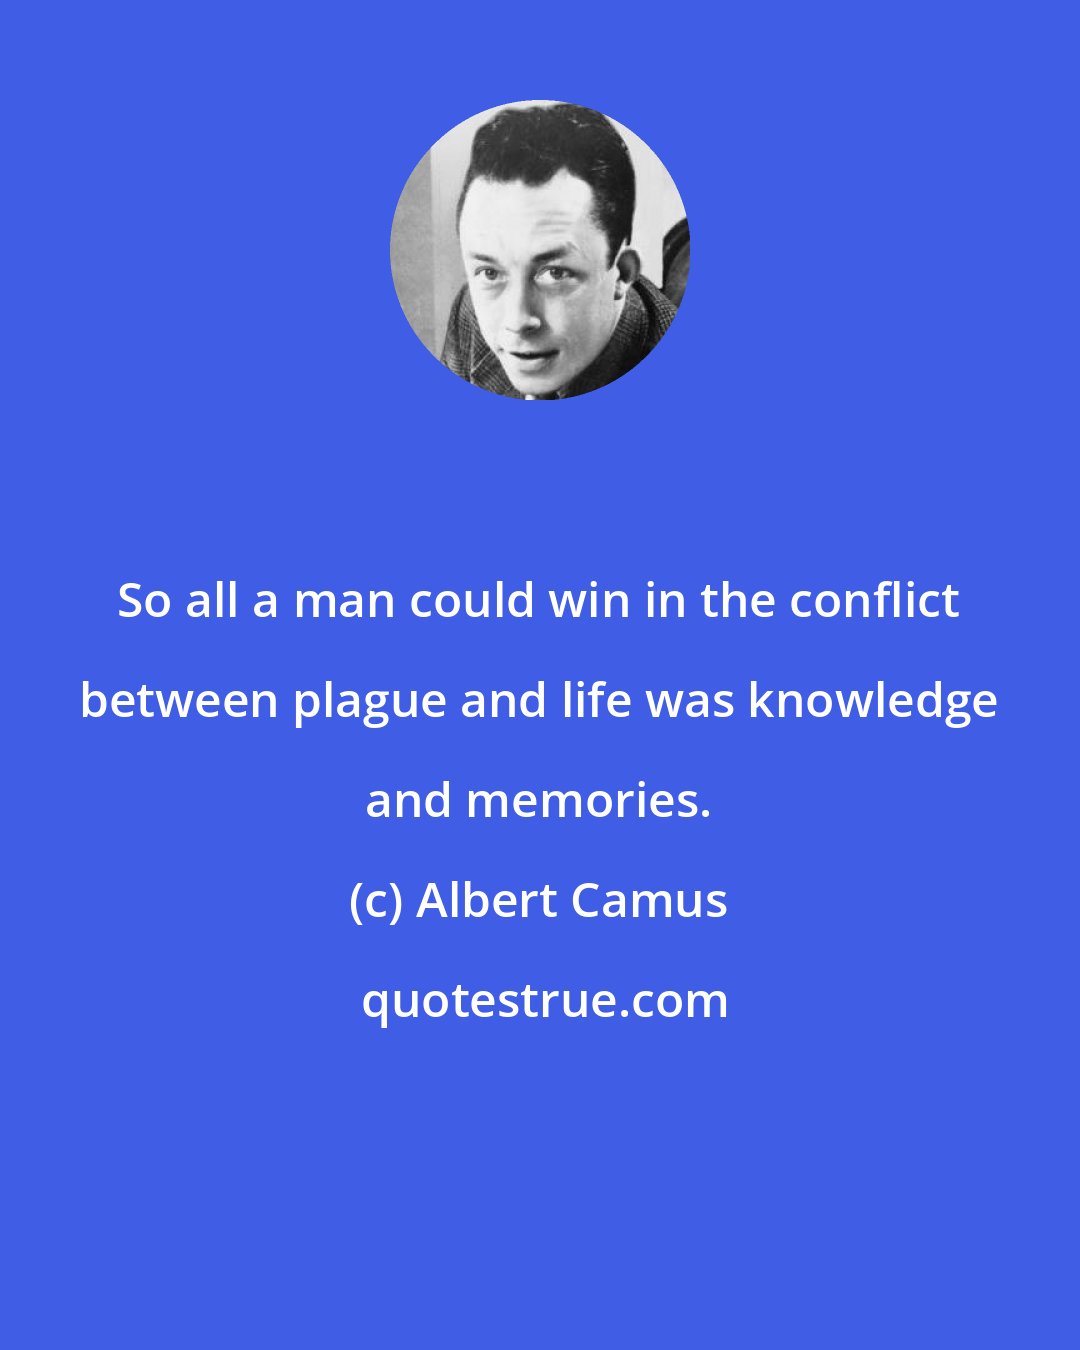 Albert Camus: So all a man could win in the conflict between plague and life was knowledge and memories.